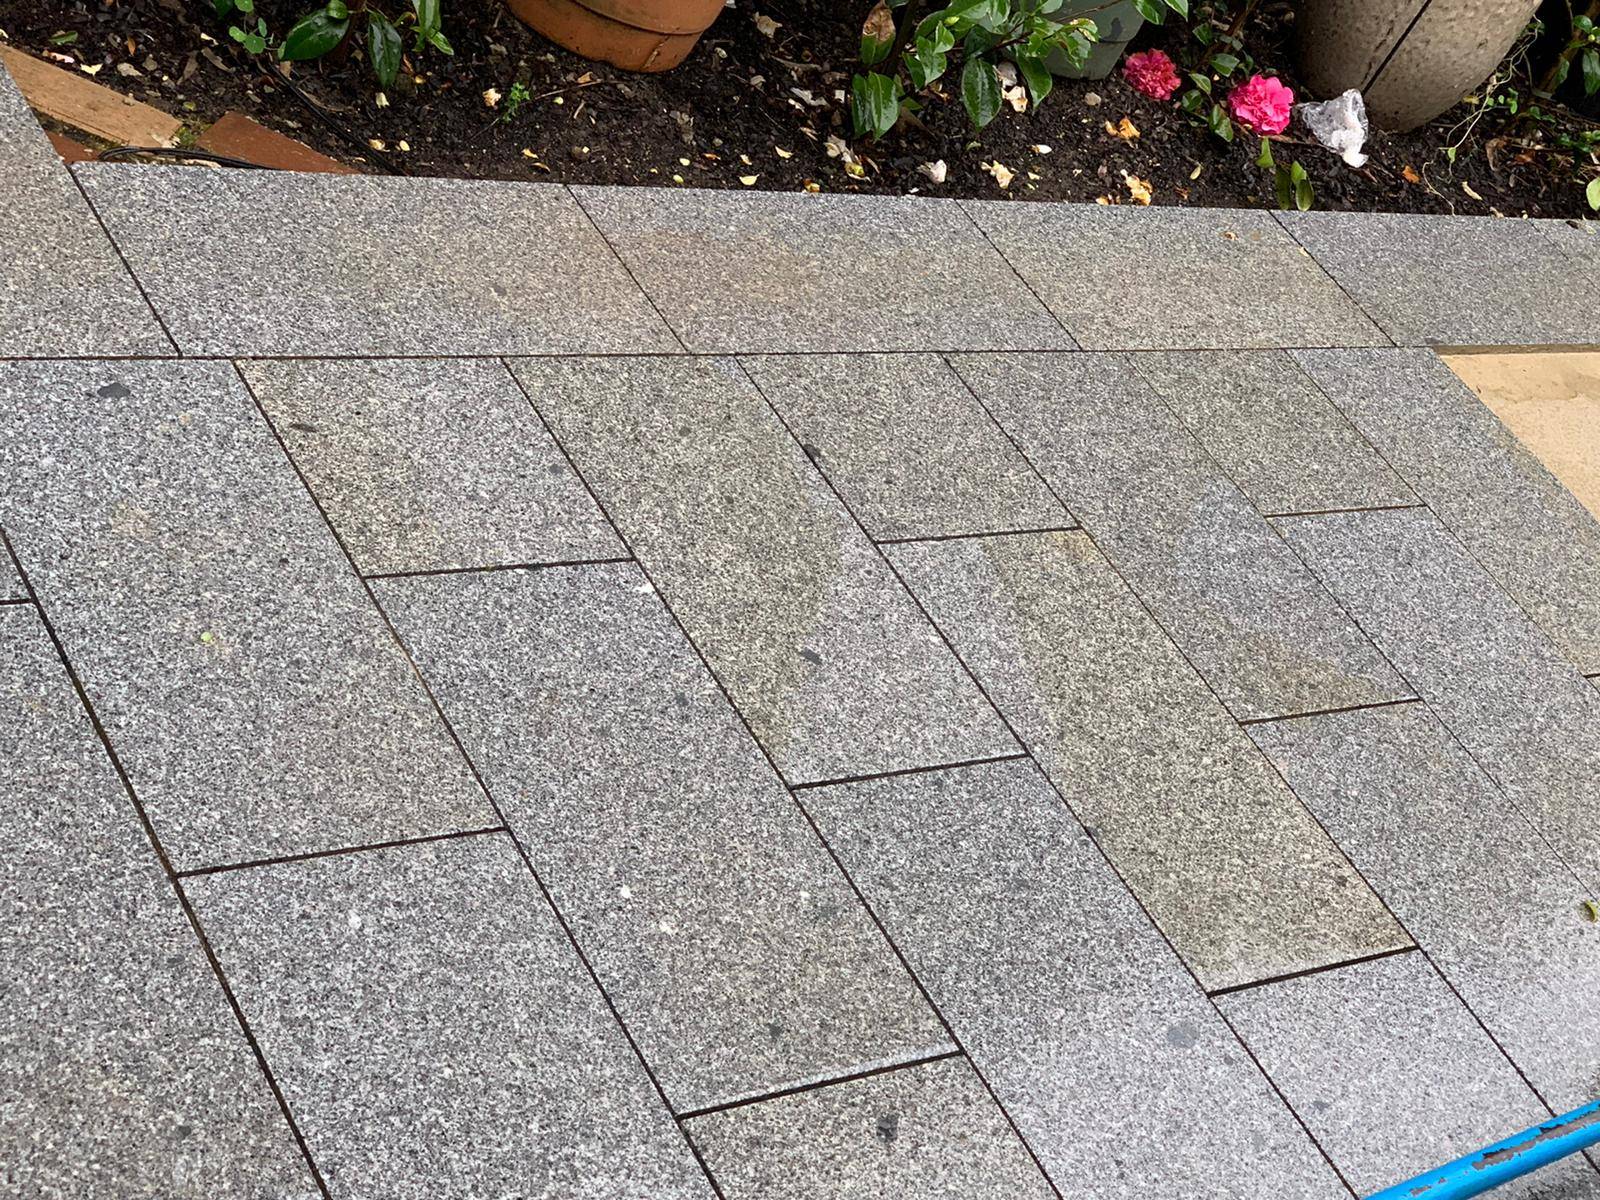 Stain on Paver